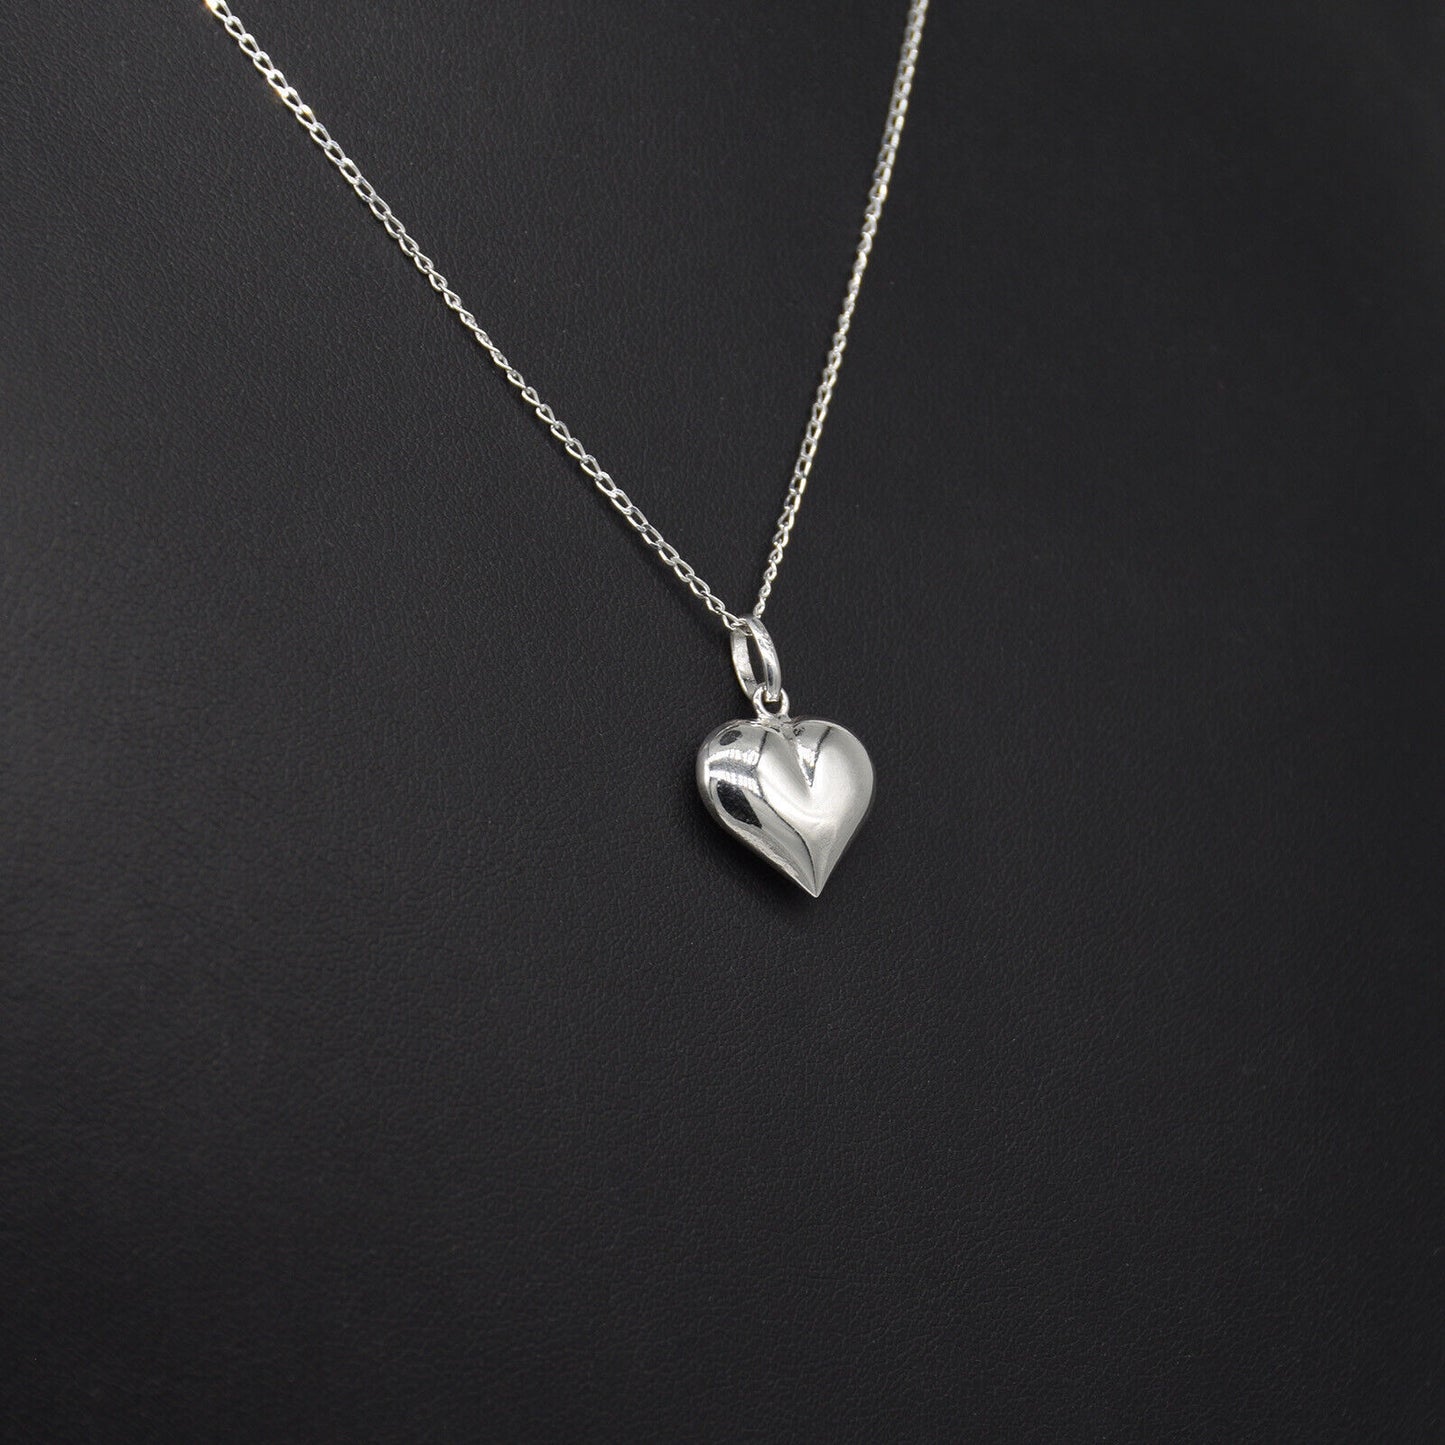 Genuine 925 Sterling Silver Puffed Heart Pendant Necklace on 14-24" Curb Chain